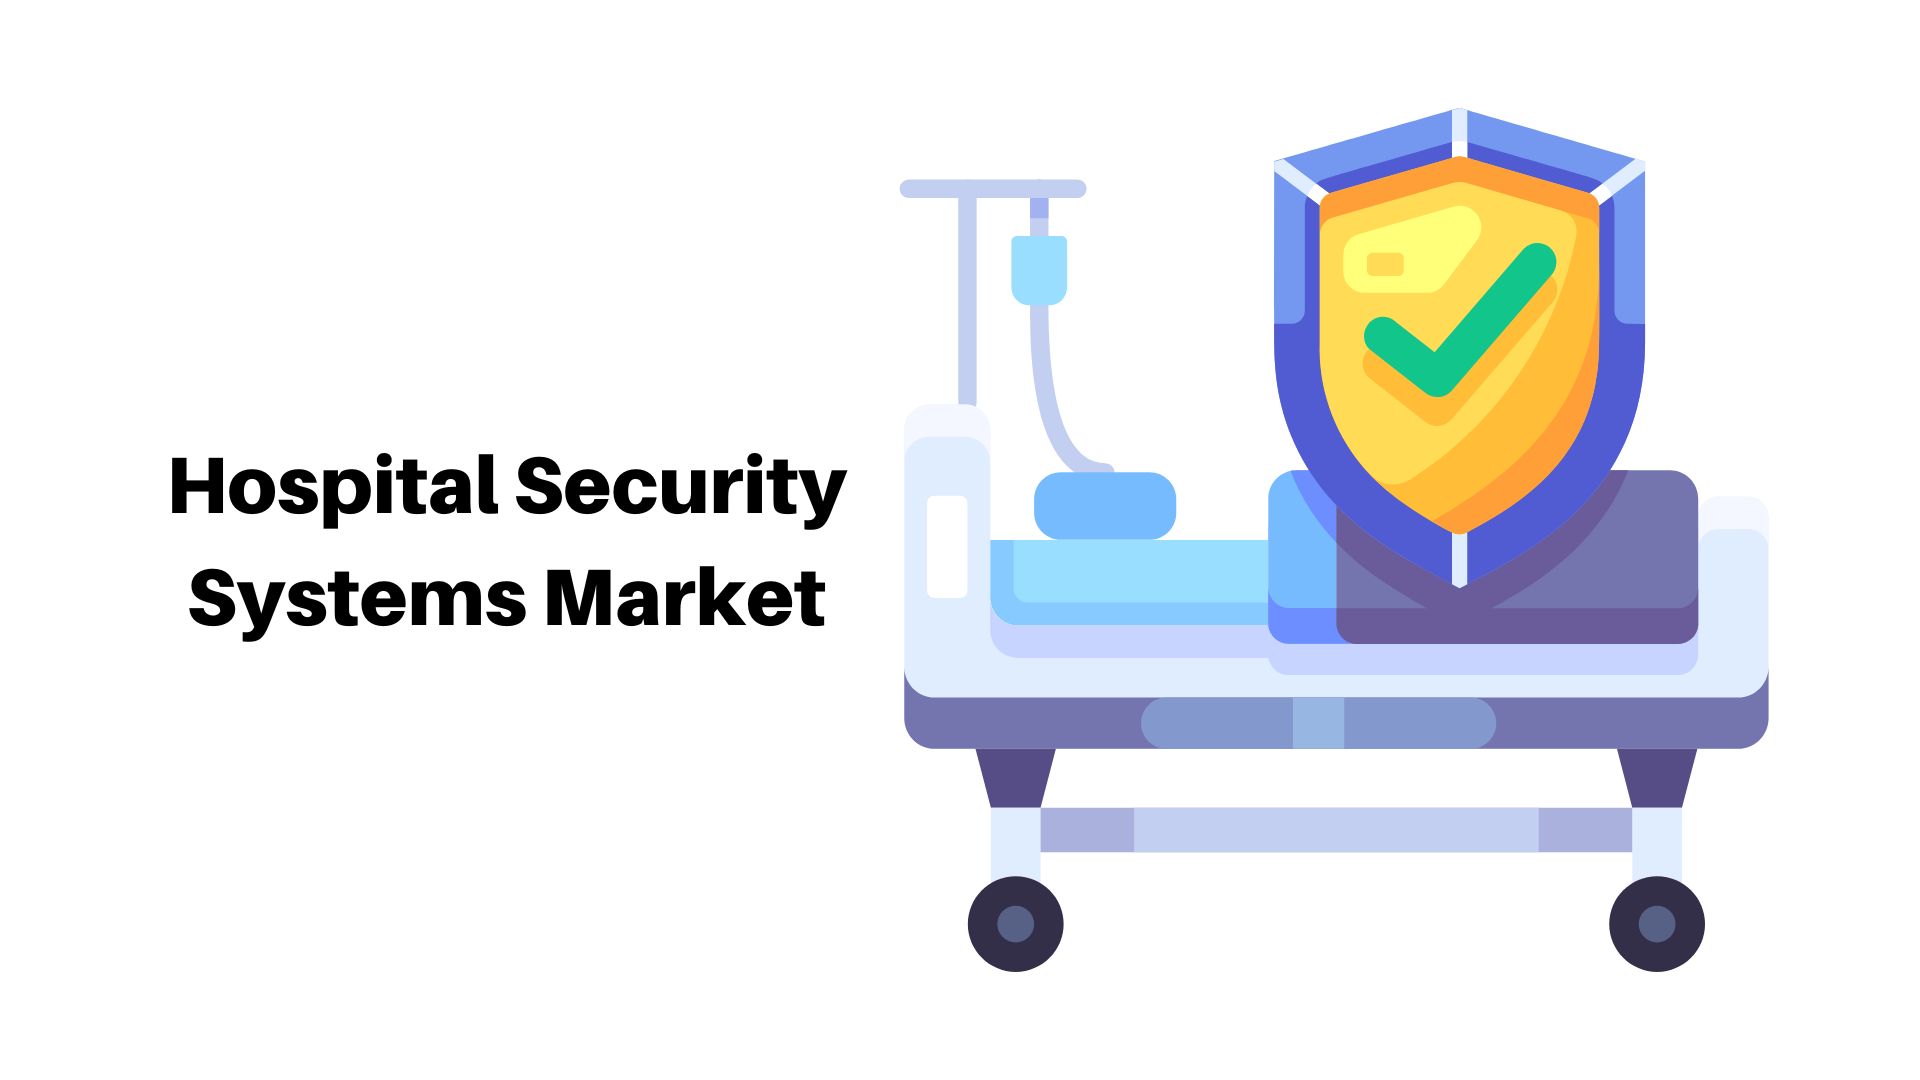 Hospital Security Systems Market to Reach USD 51.0 Billion by 2032, Says Market.us Research Study